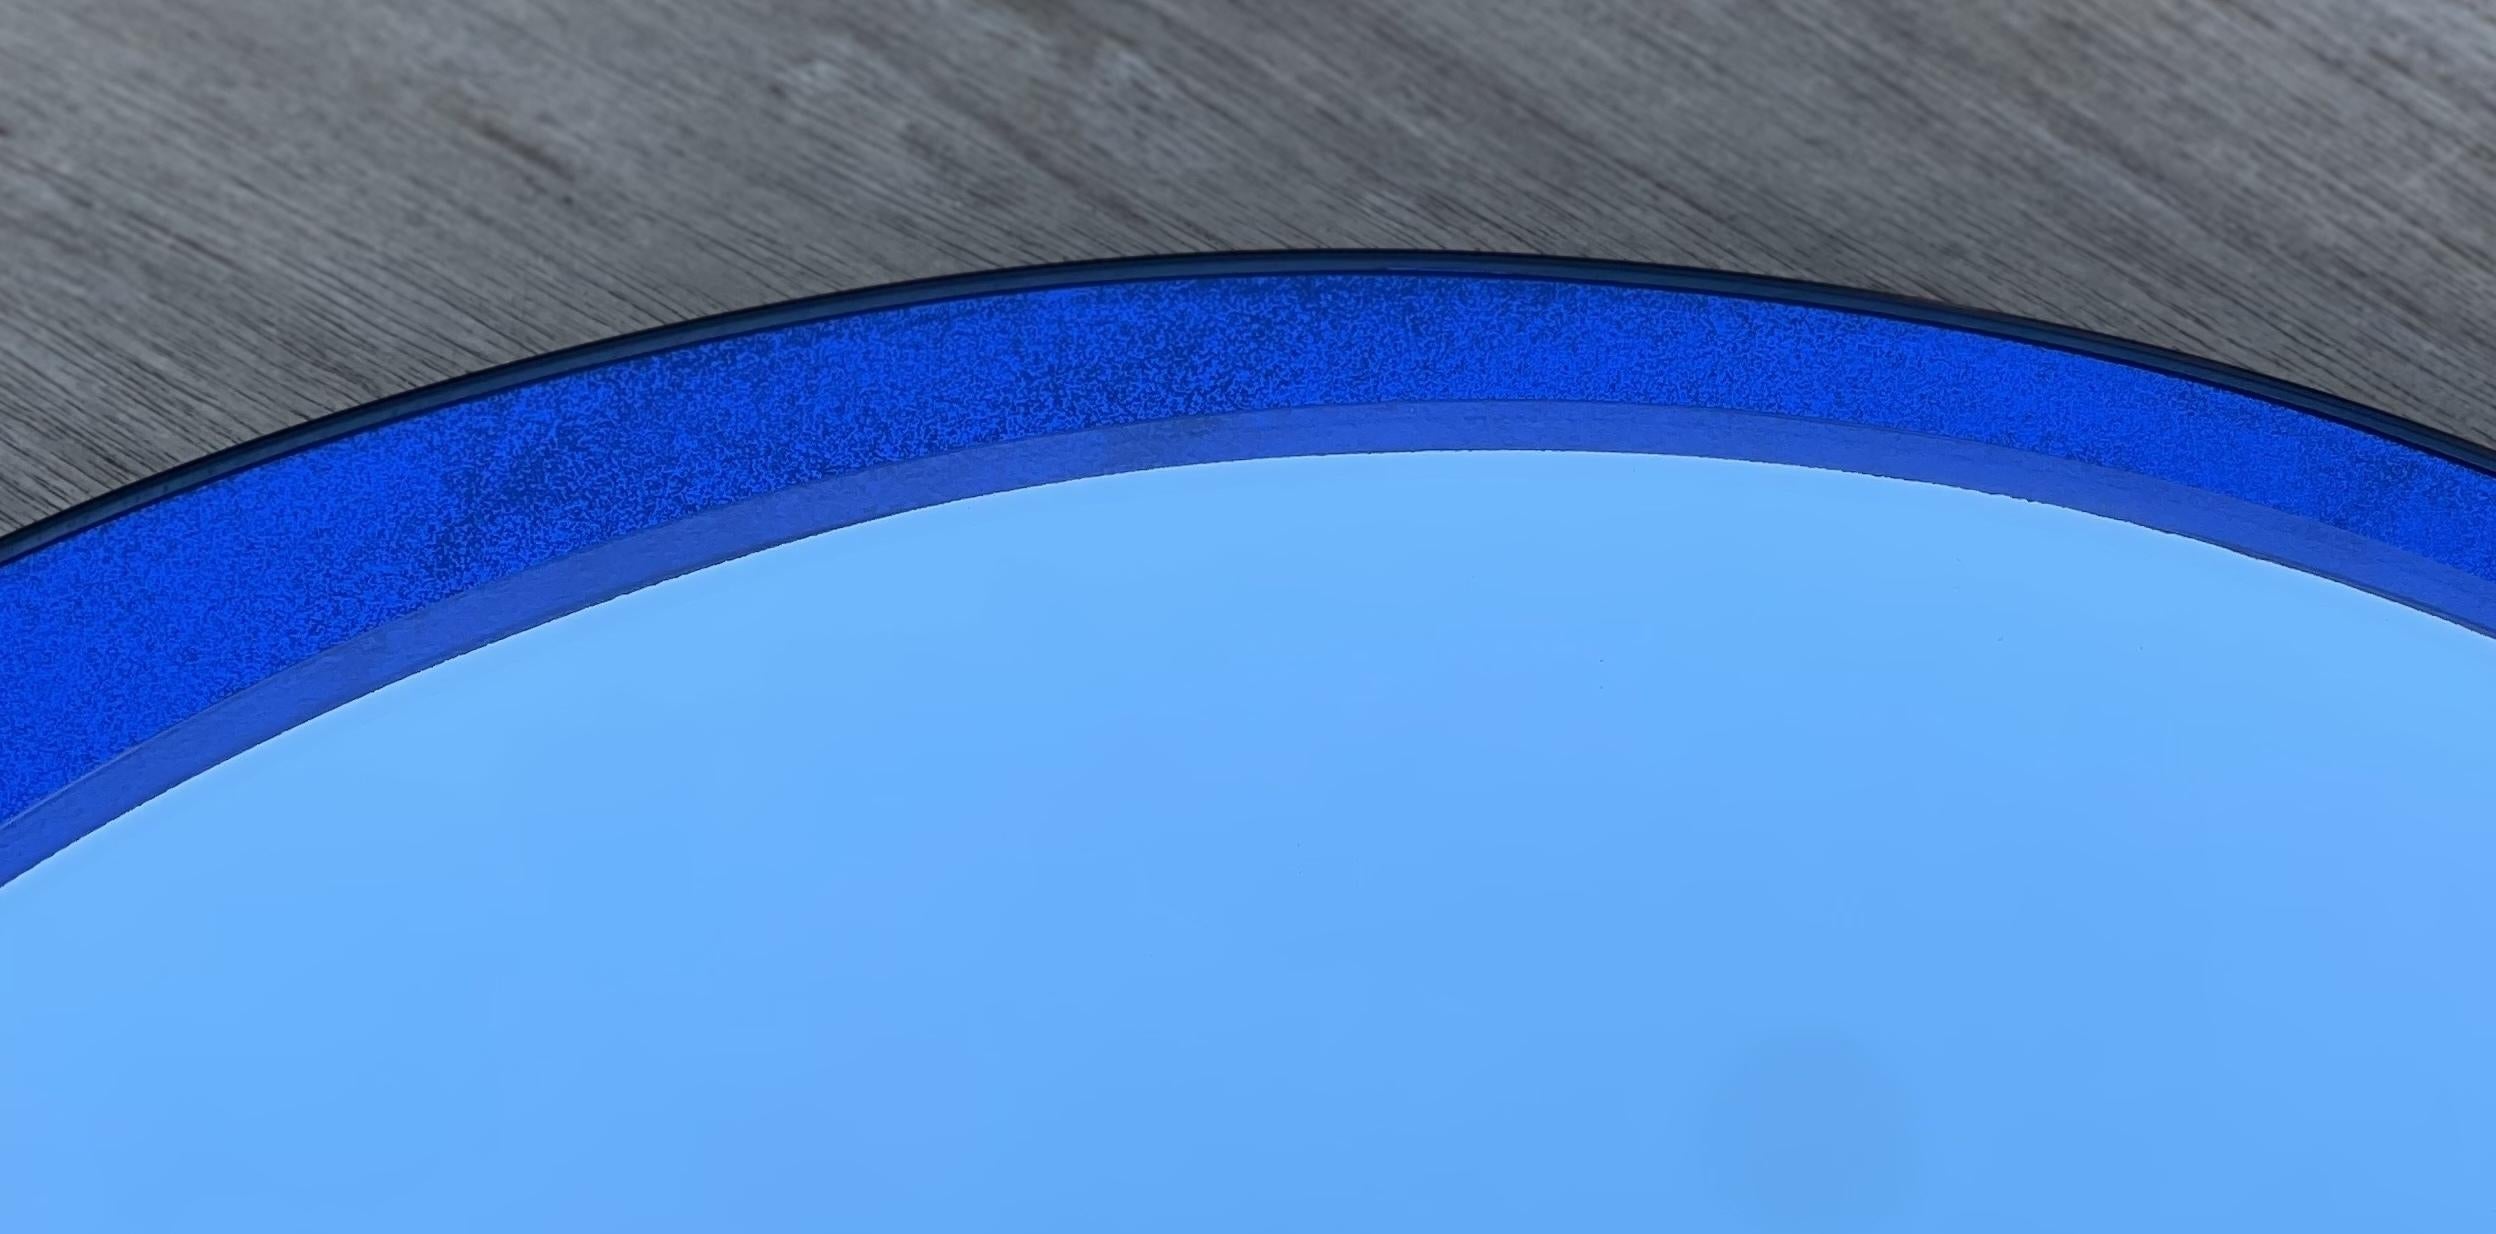 Designer 1970s Veca Made in Italy Mid-Century Modern Wall Cobalt Blue Mirror For Sale 1